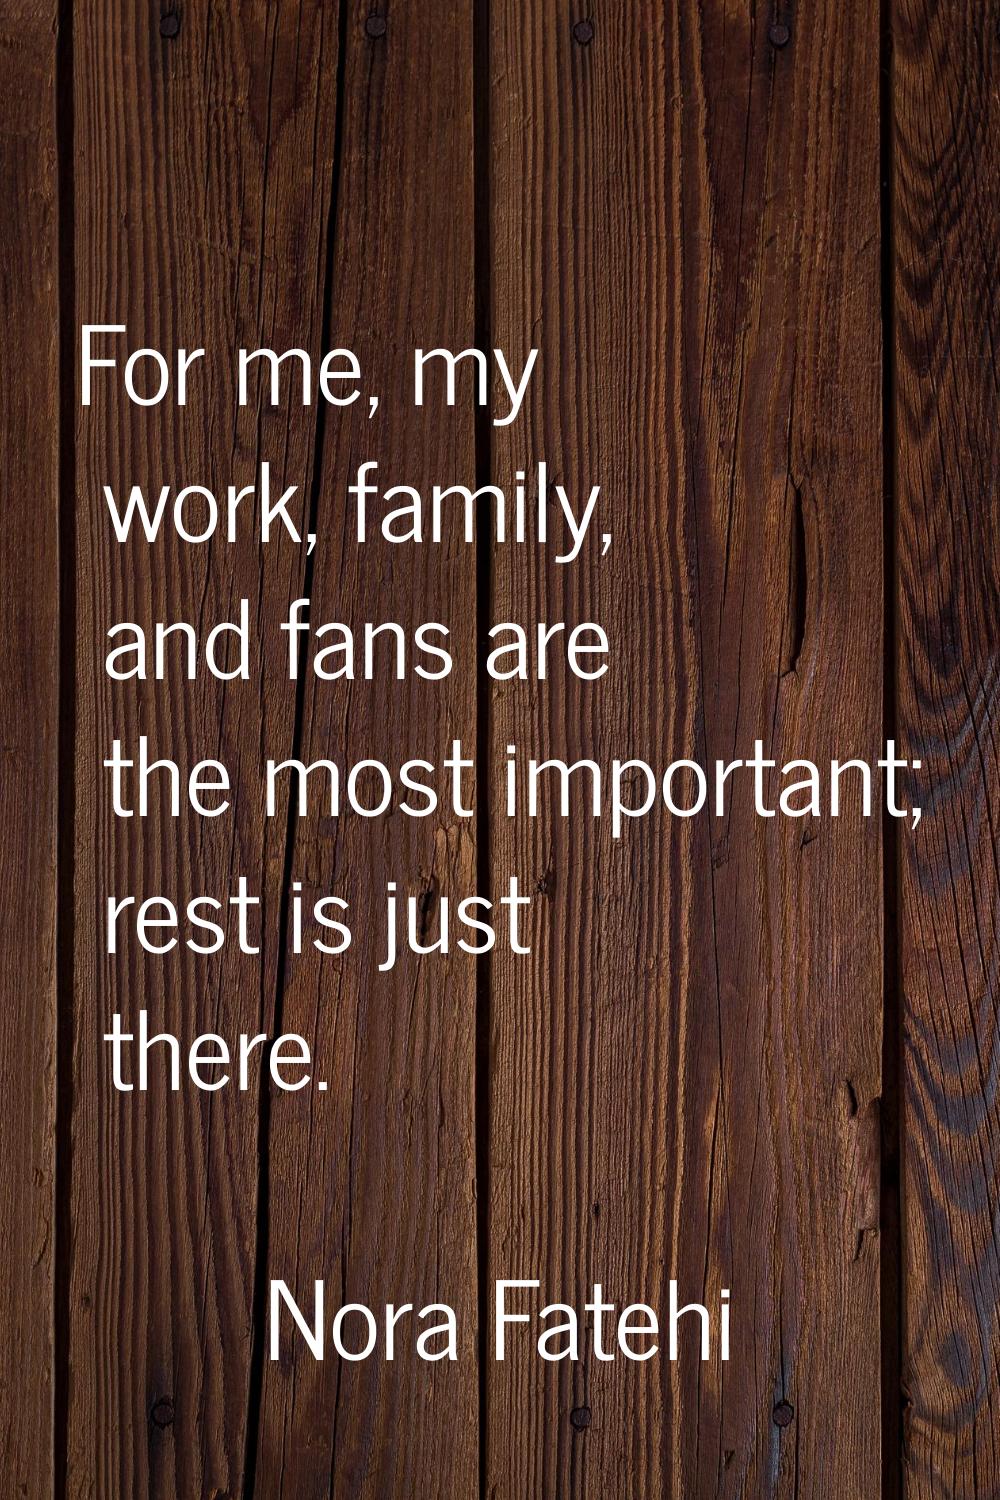 For me, my work, family, and fans are the most important; rest is just there.